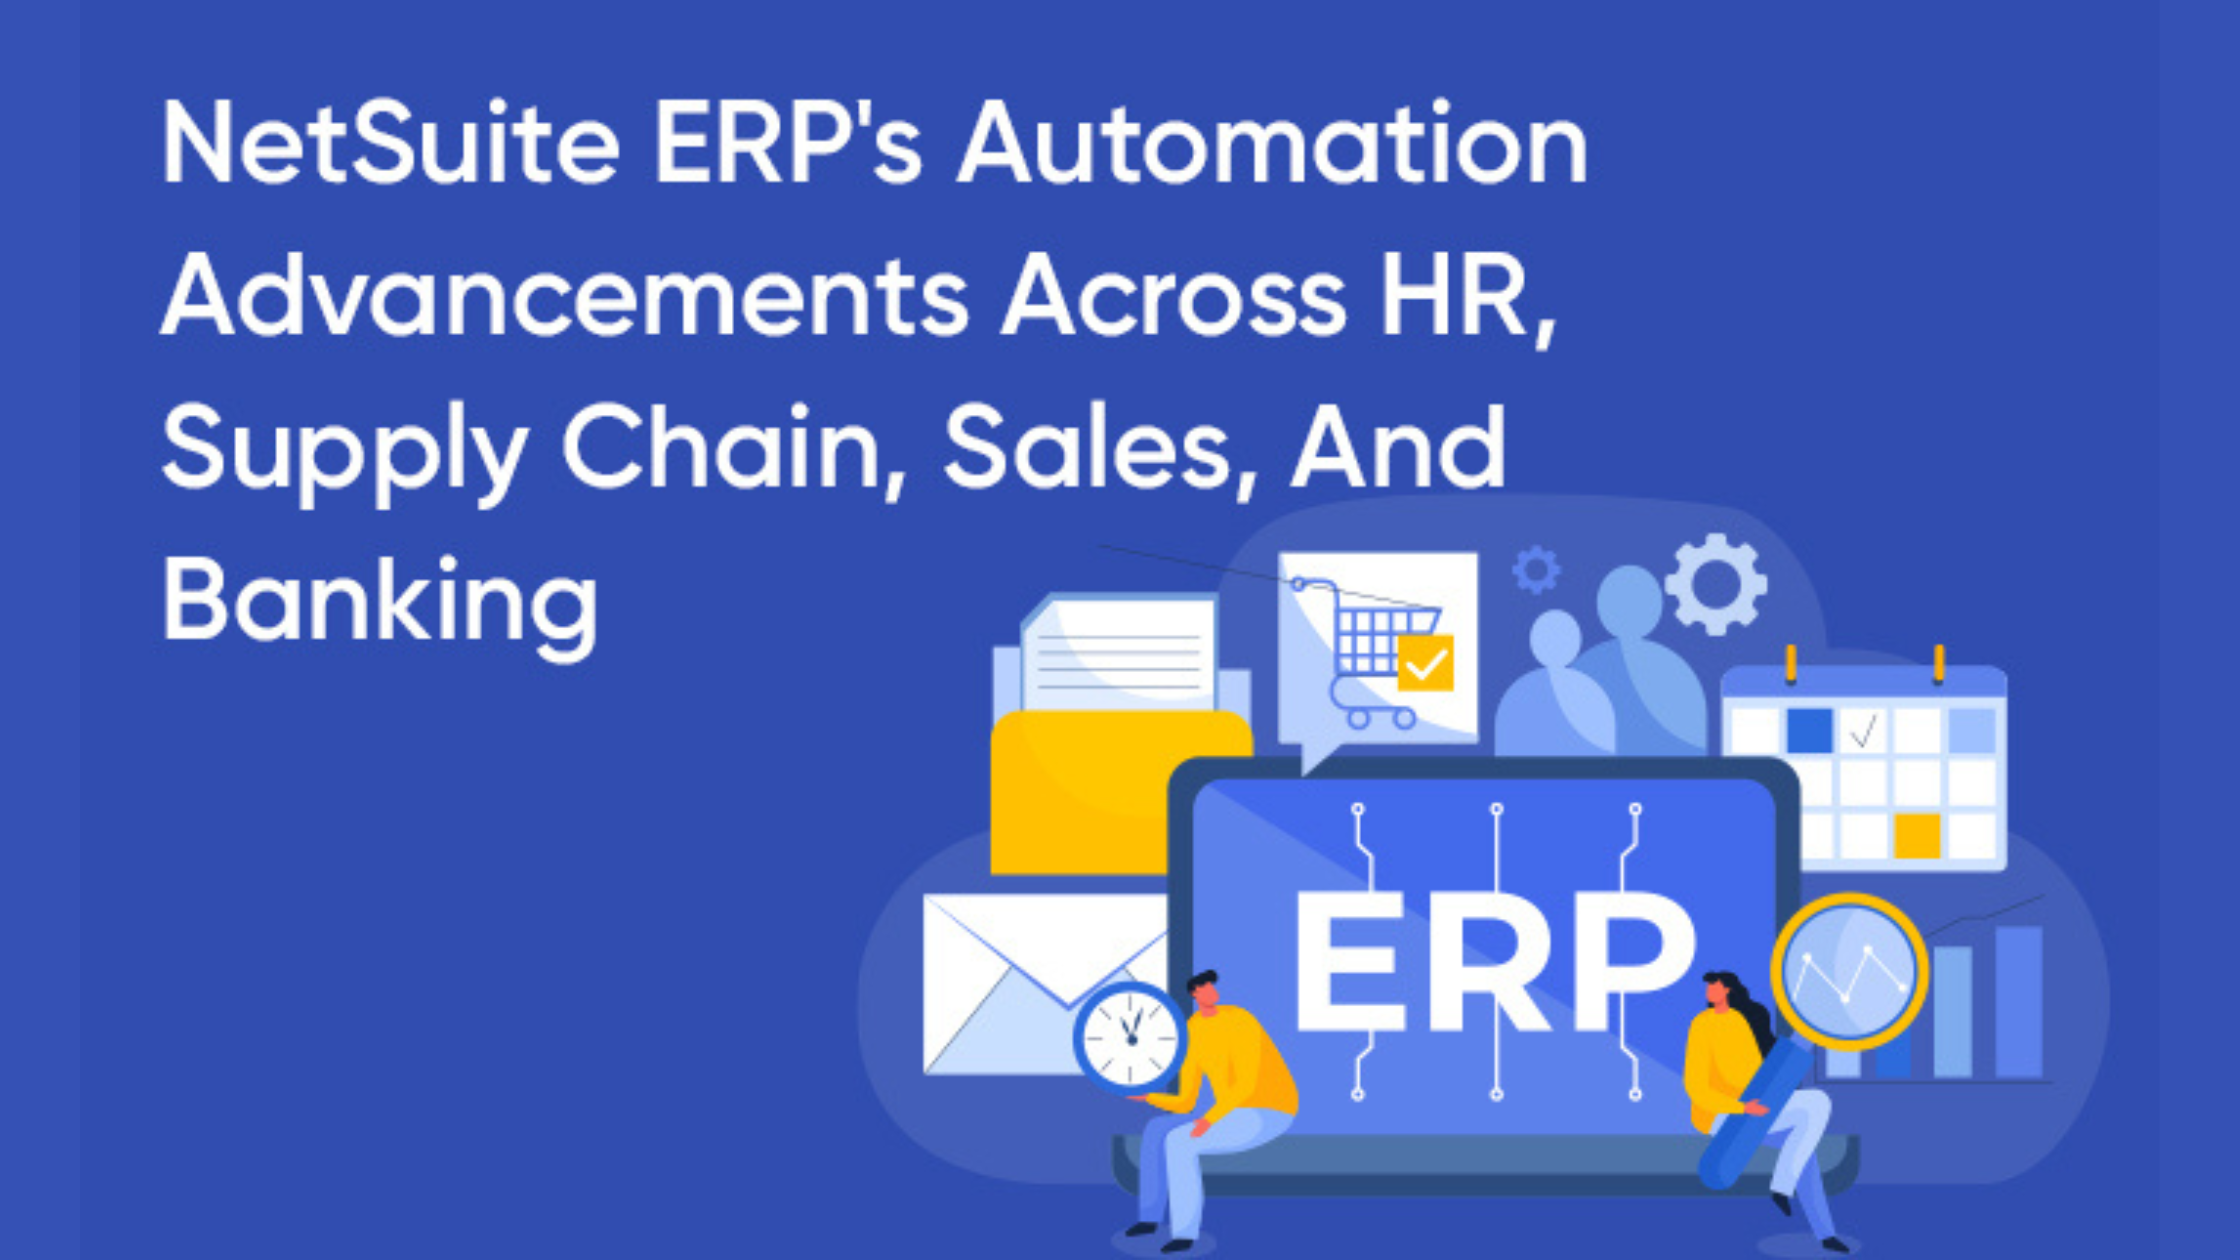 NetSuite ERP's Automation Advancements Across HR, Supply Chain, Sales, And Banking